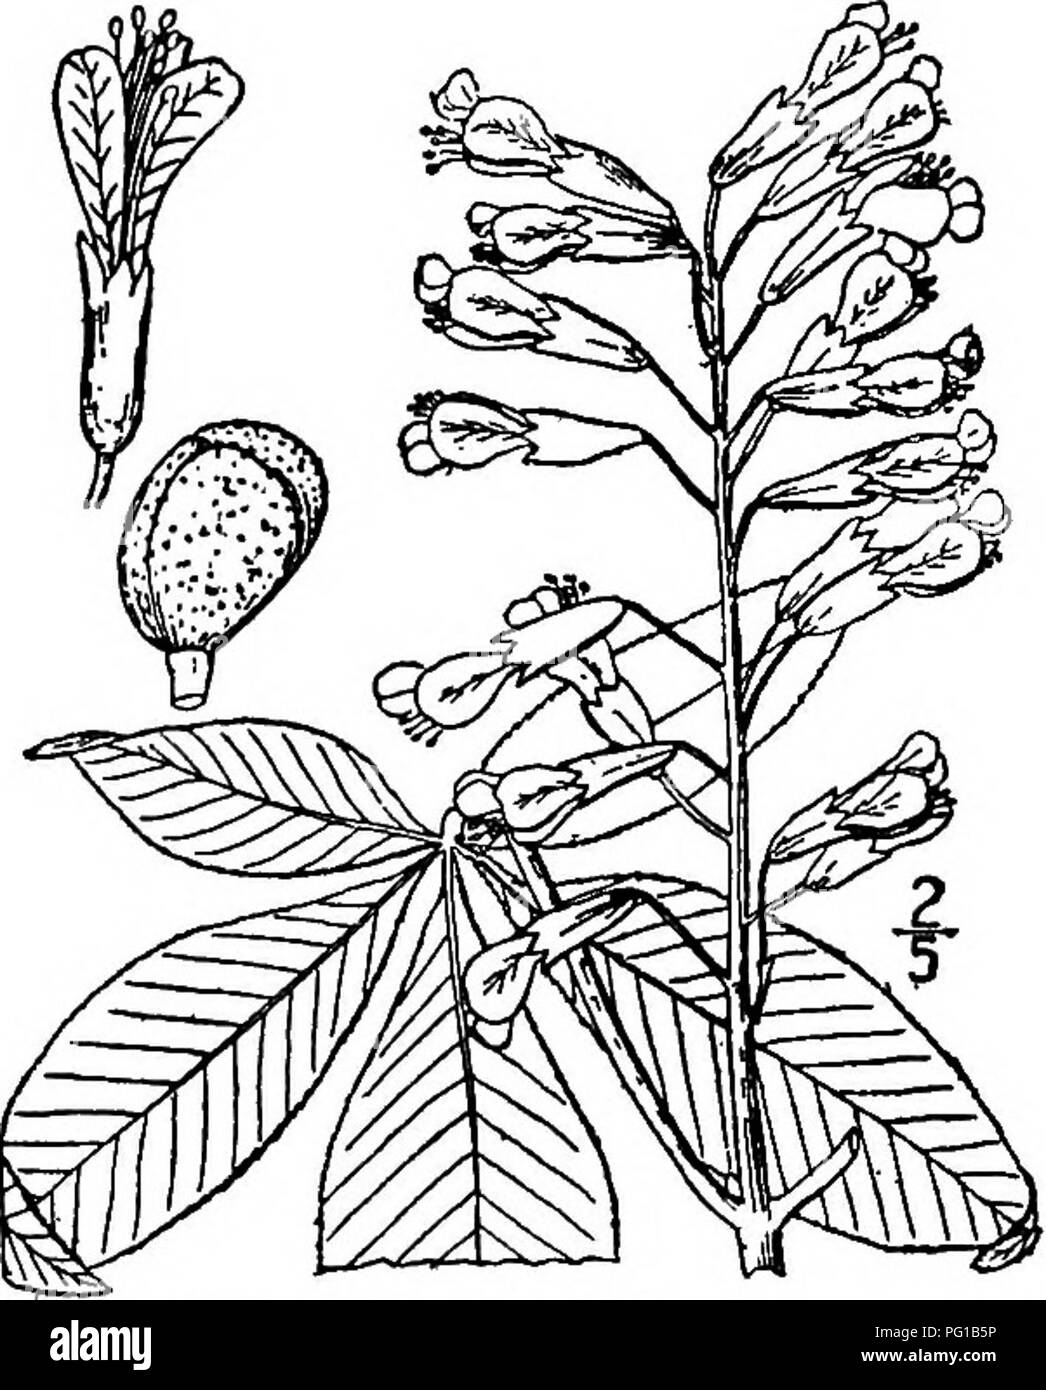 . North American trees : being descriptions and illustrations of the trees growing independently of cultivation in North America, north of Mexico and the West Indies . Trees. Red Buckeye 66i hairy, becoming smooth and gray, the buds smooth, not sticky, blunt, the terminal ones 6 mm. long or more. The leaves are usually composed of five leaflets; the leaf-stalk is stout, finely hairy, 7 to 15 cm. long; the leaflets are usually short- stalked, oblong-lanceolate to oblanceolate, pointed, 6 to 15 cm. long, finely and somewhat irregularly toothed, and when mature are bright green and shining on the Stock Photo